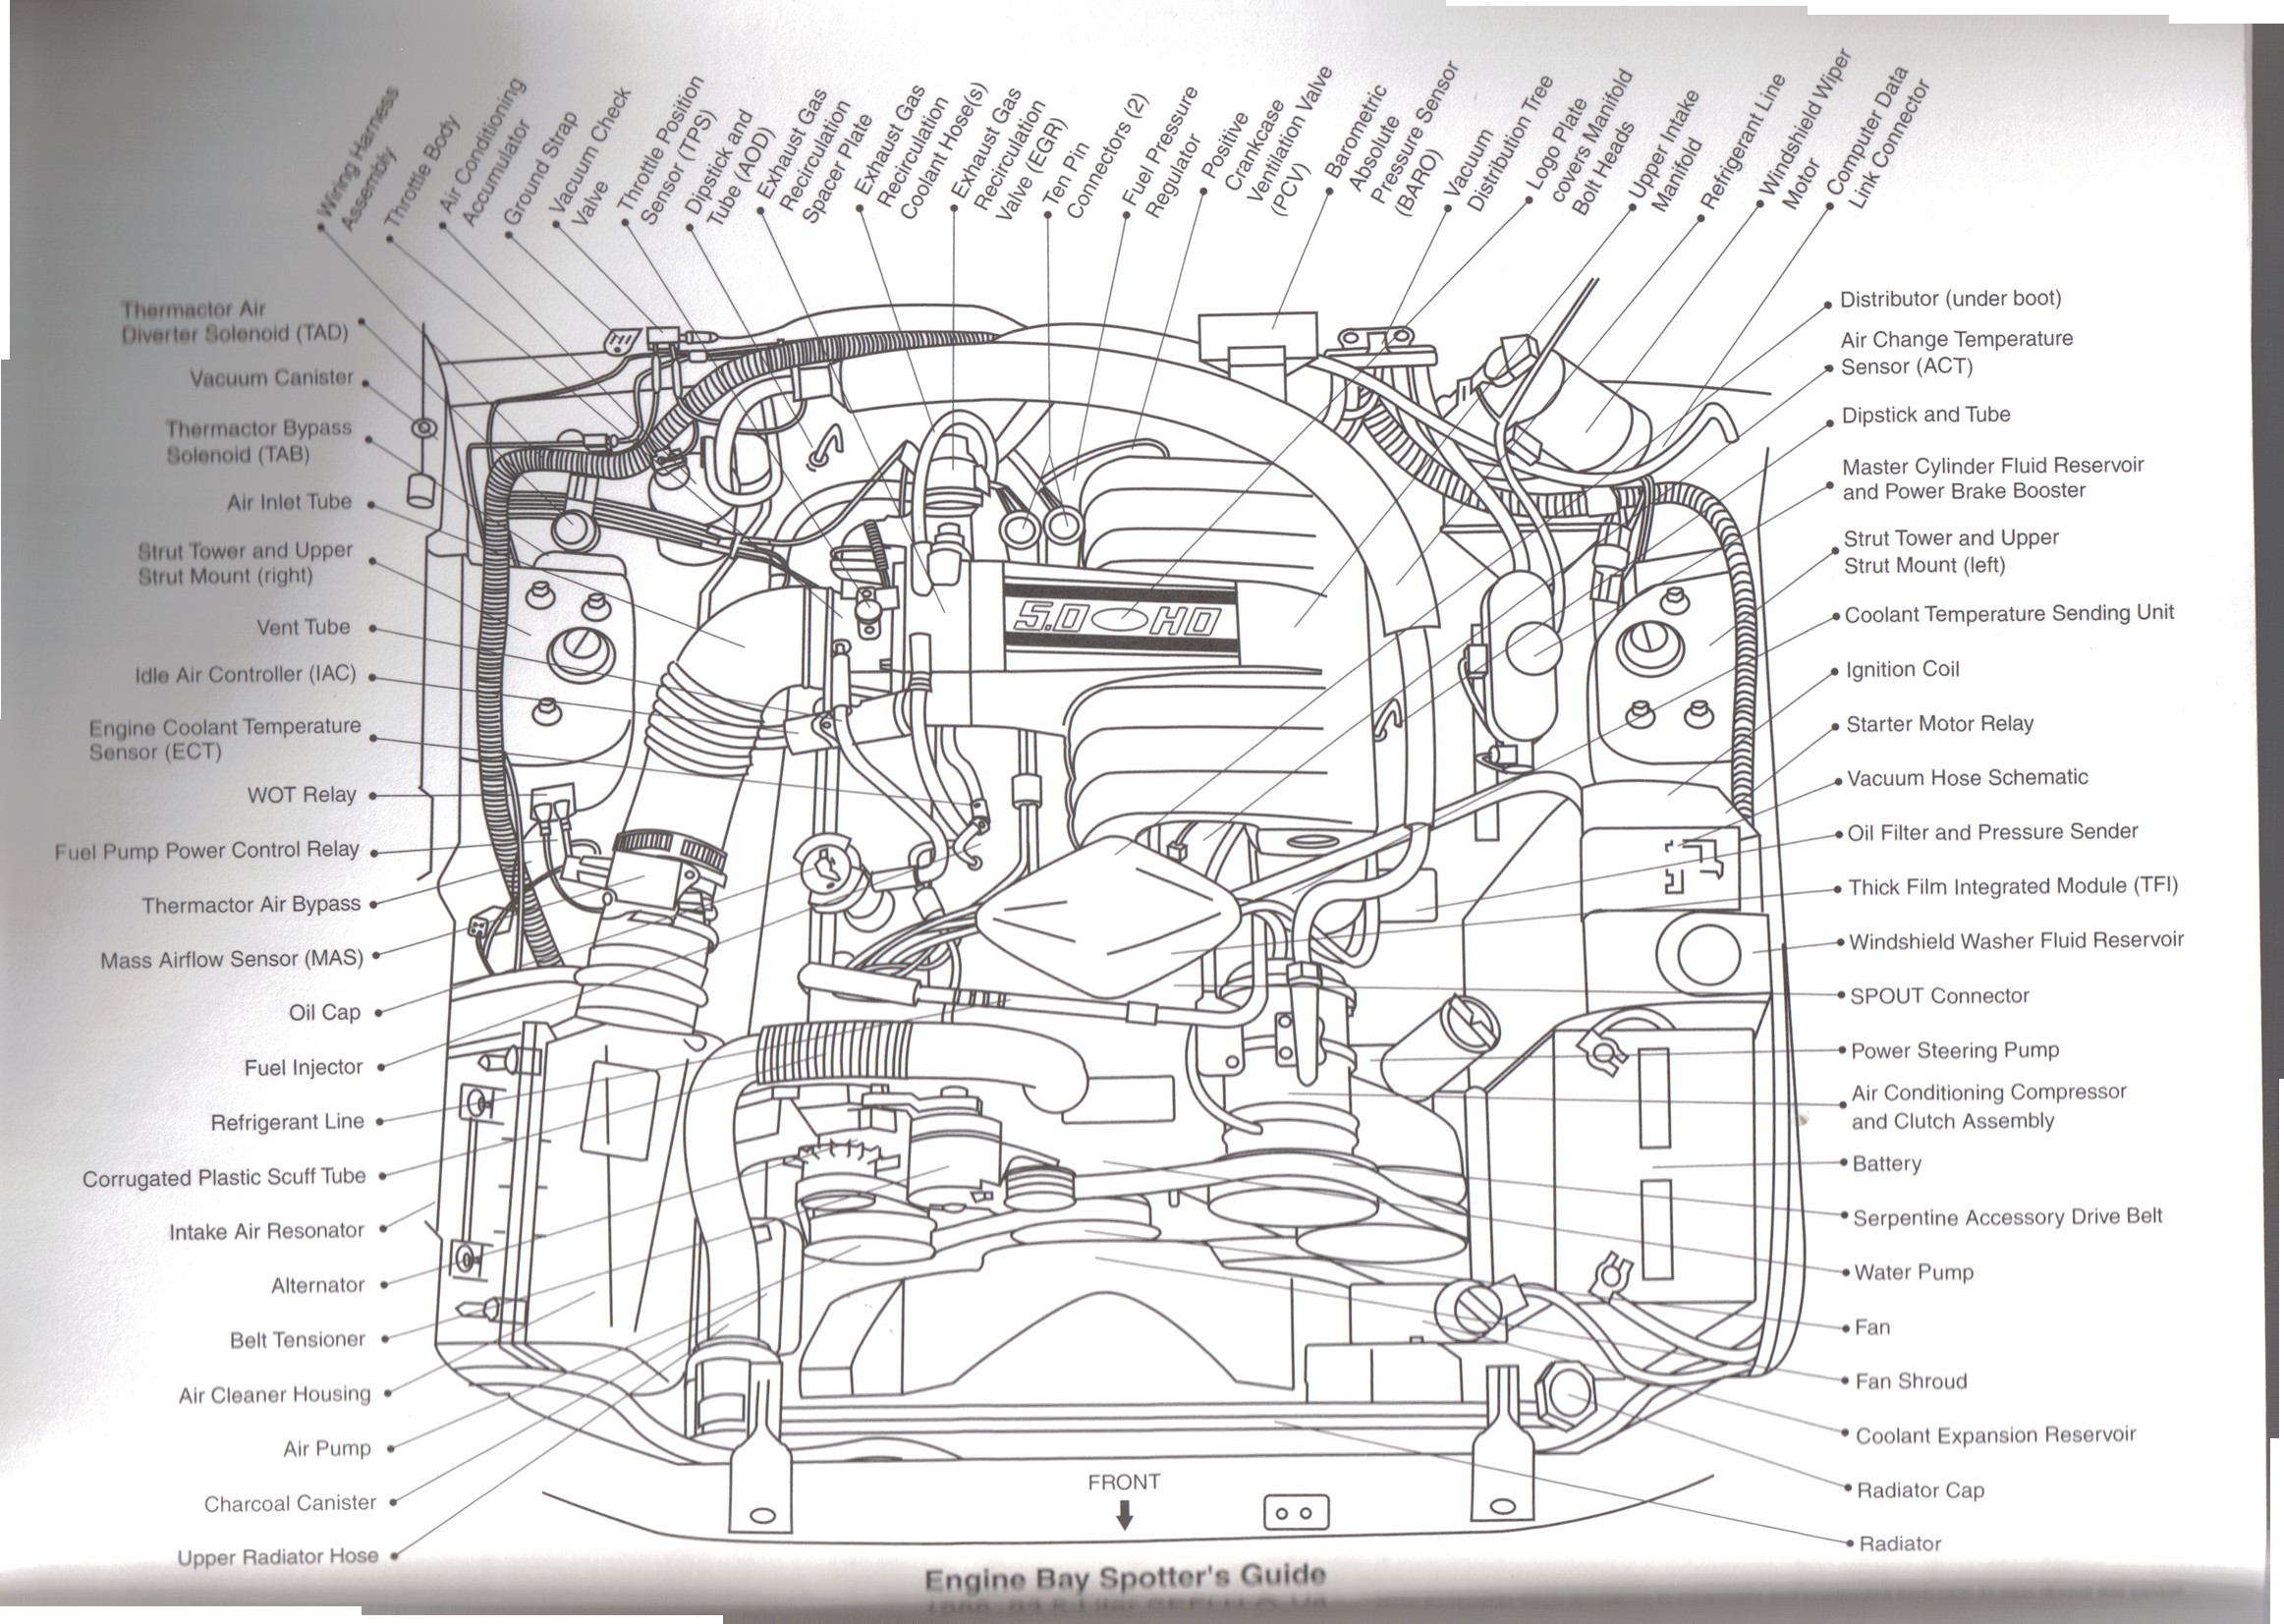 Small Engine Diagram Labeled 92 Mustang Engine Diagram Another Blog About Wiring Diagram • Of Small Engine Diagram Labeled